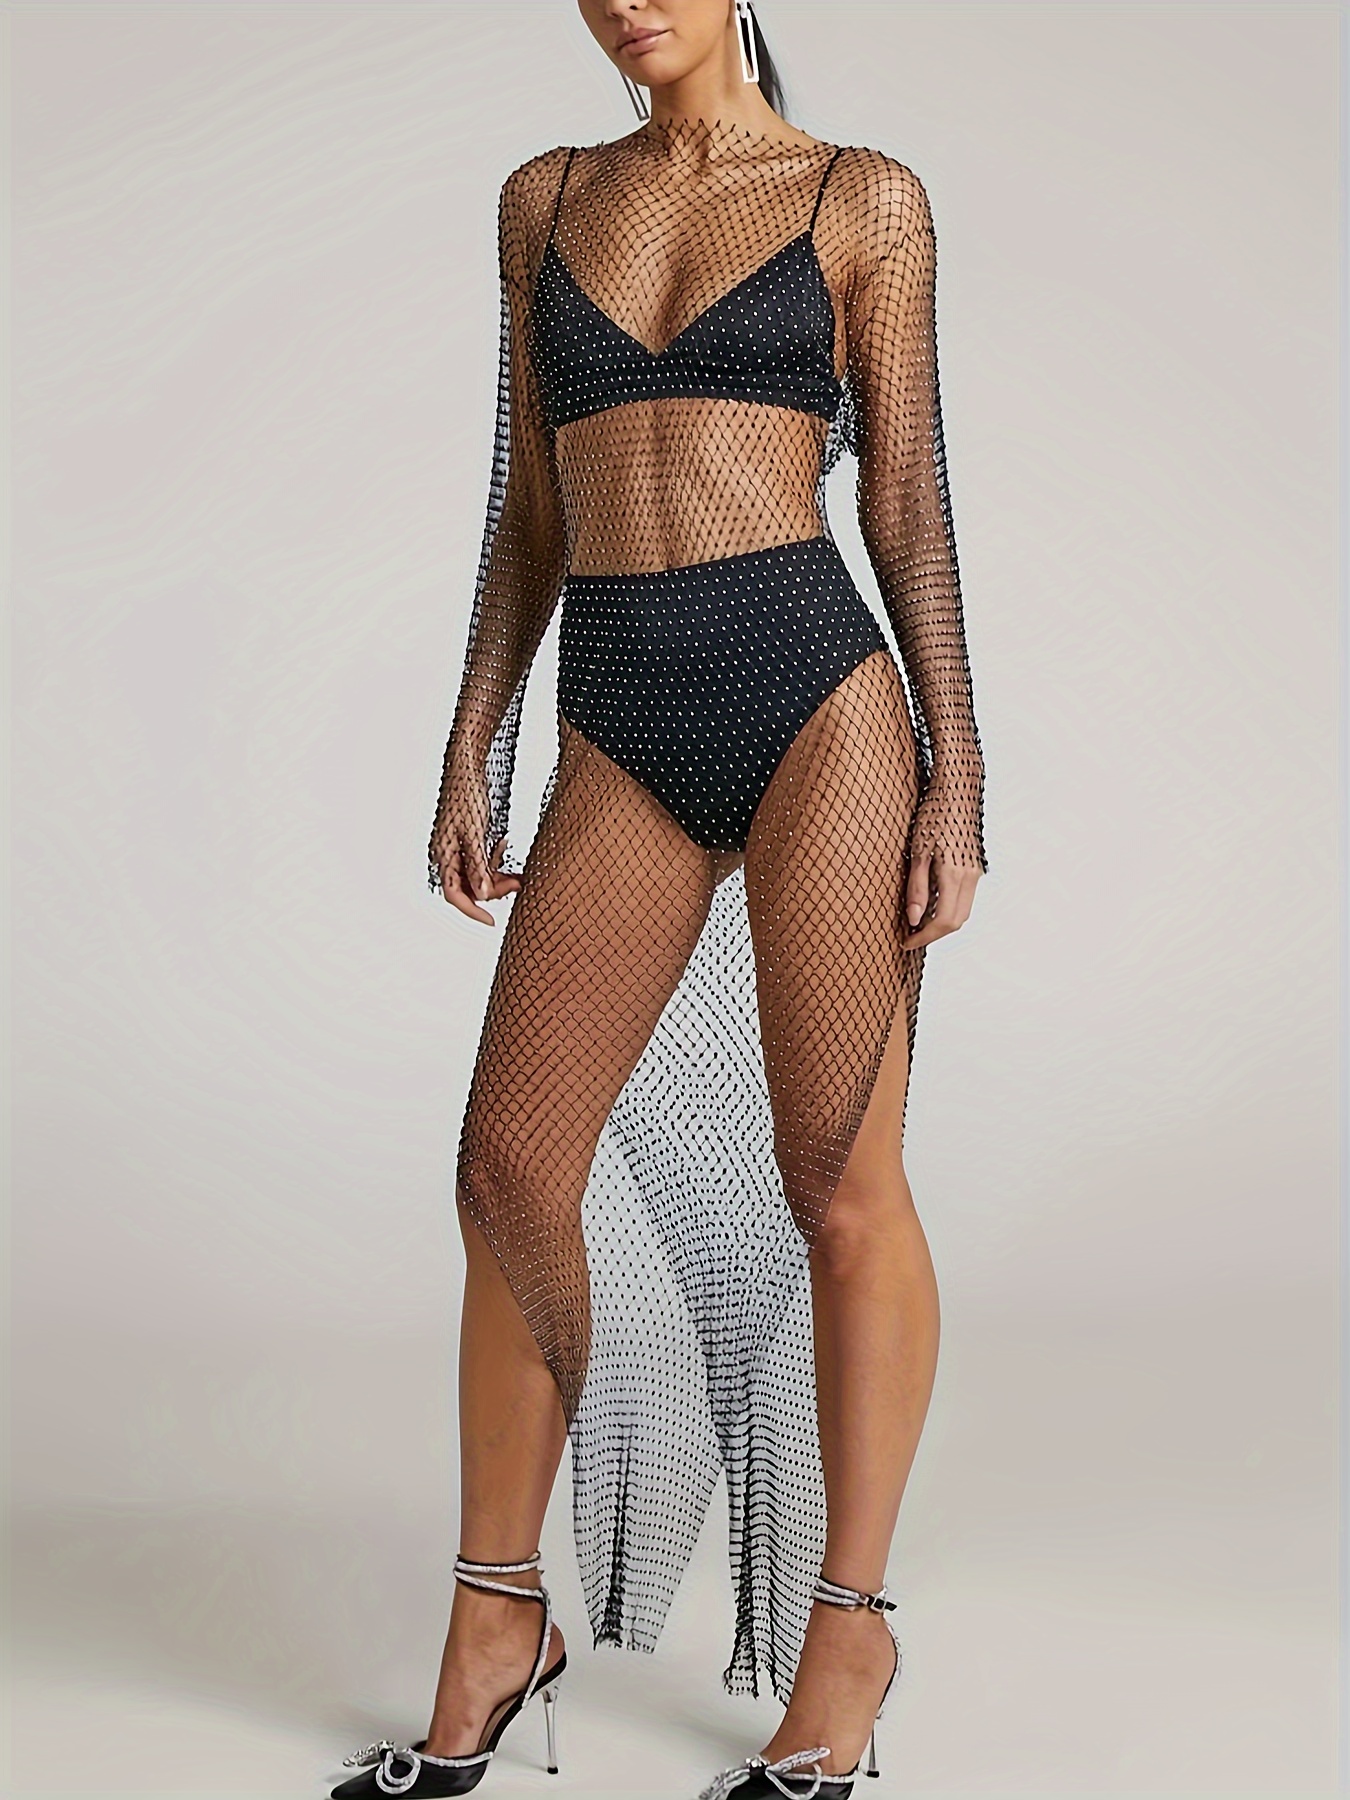 Is That The New Rhinestone Detail Split Thigh Sheer Fishnet Mesh Dress  Without Underwear ??